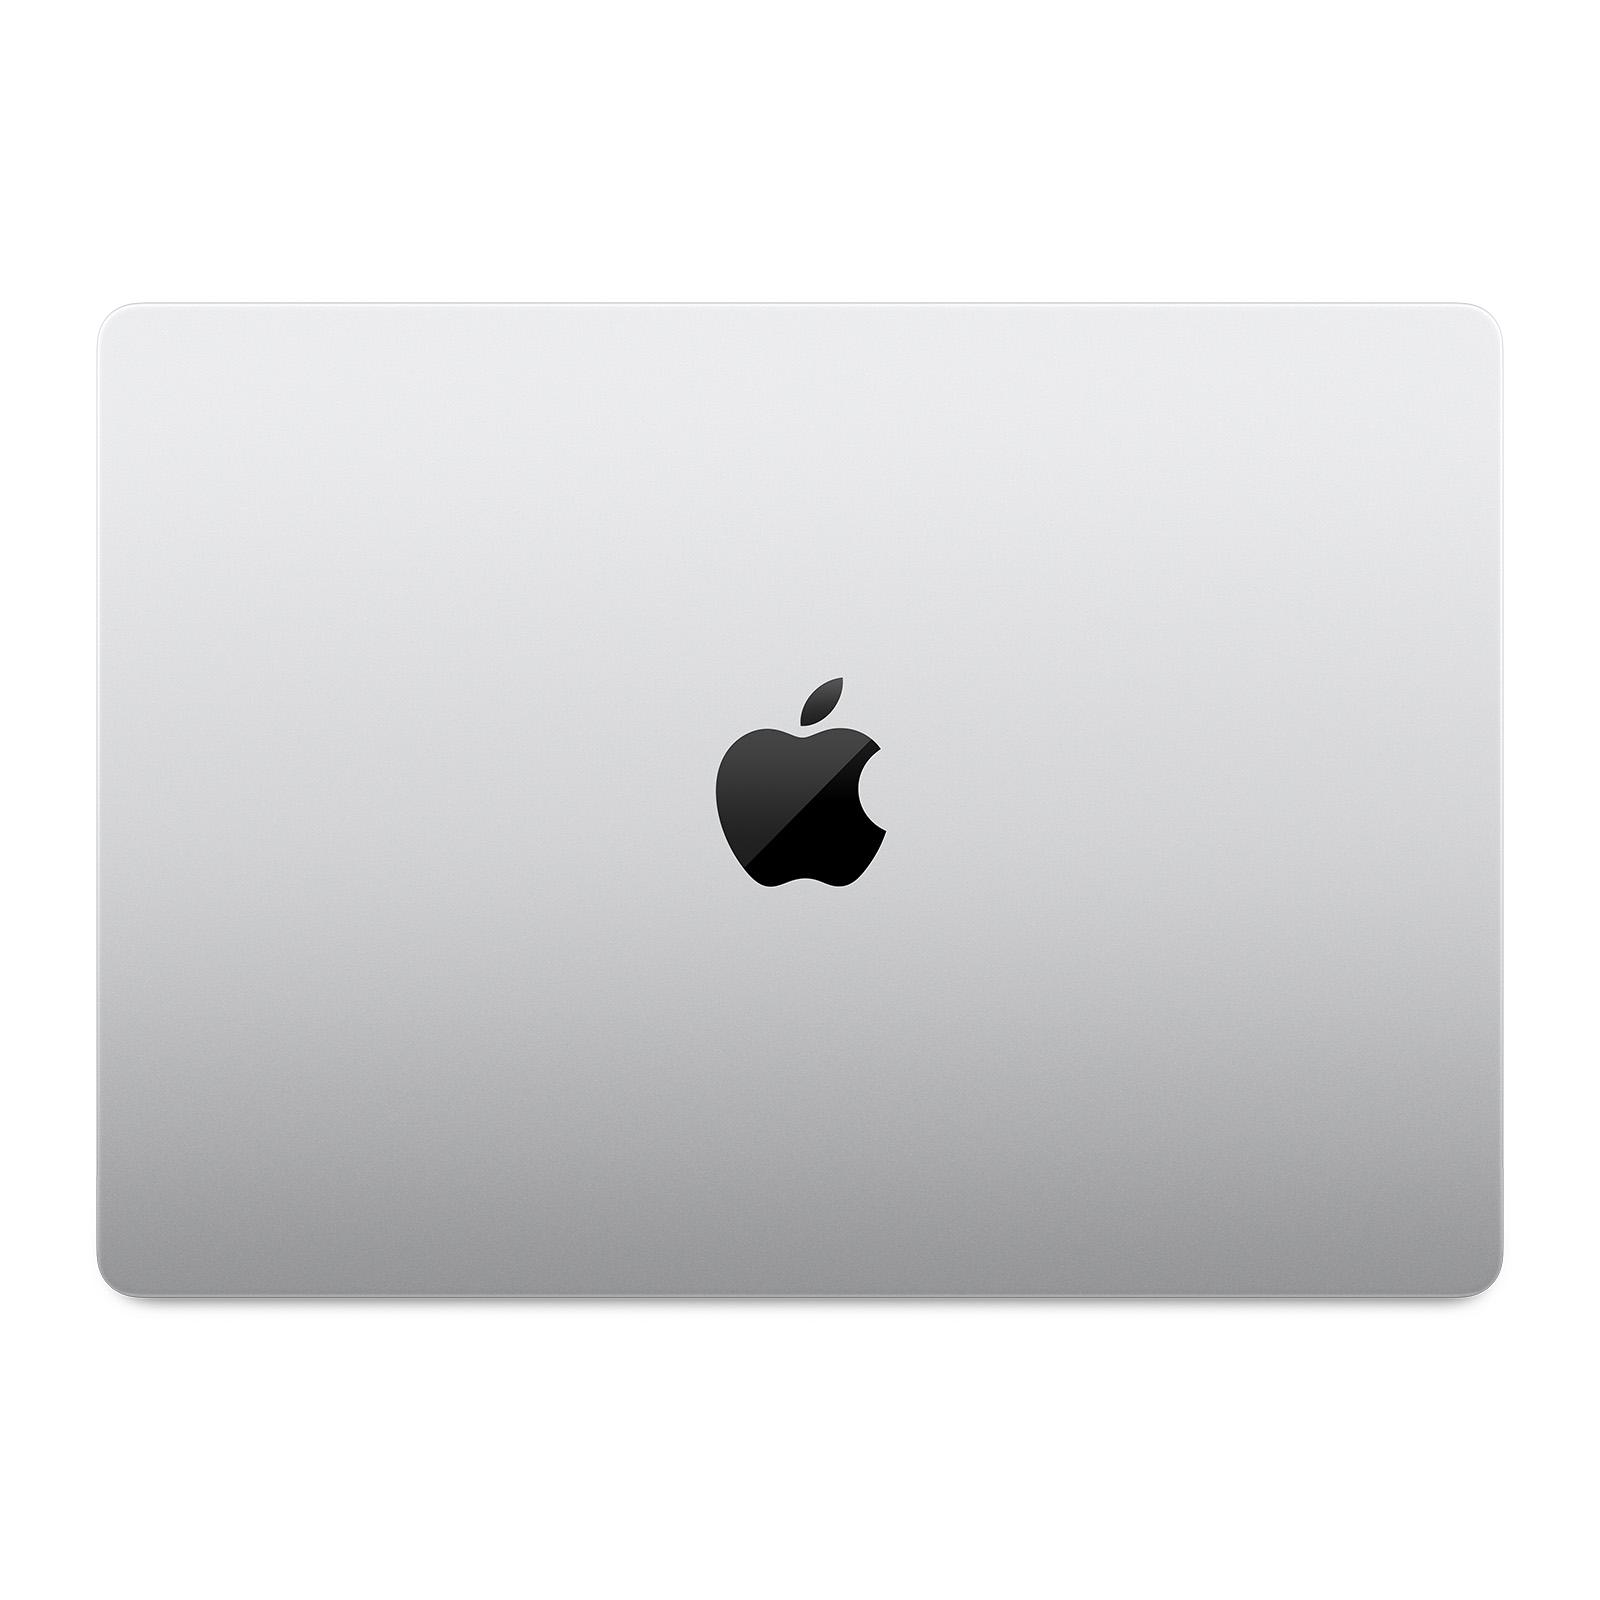 14-inch MacBook Pro: Apple M3 chip with 8?core CPU and 10?core GPU, 512GB SSD image11